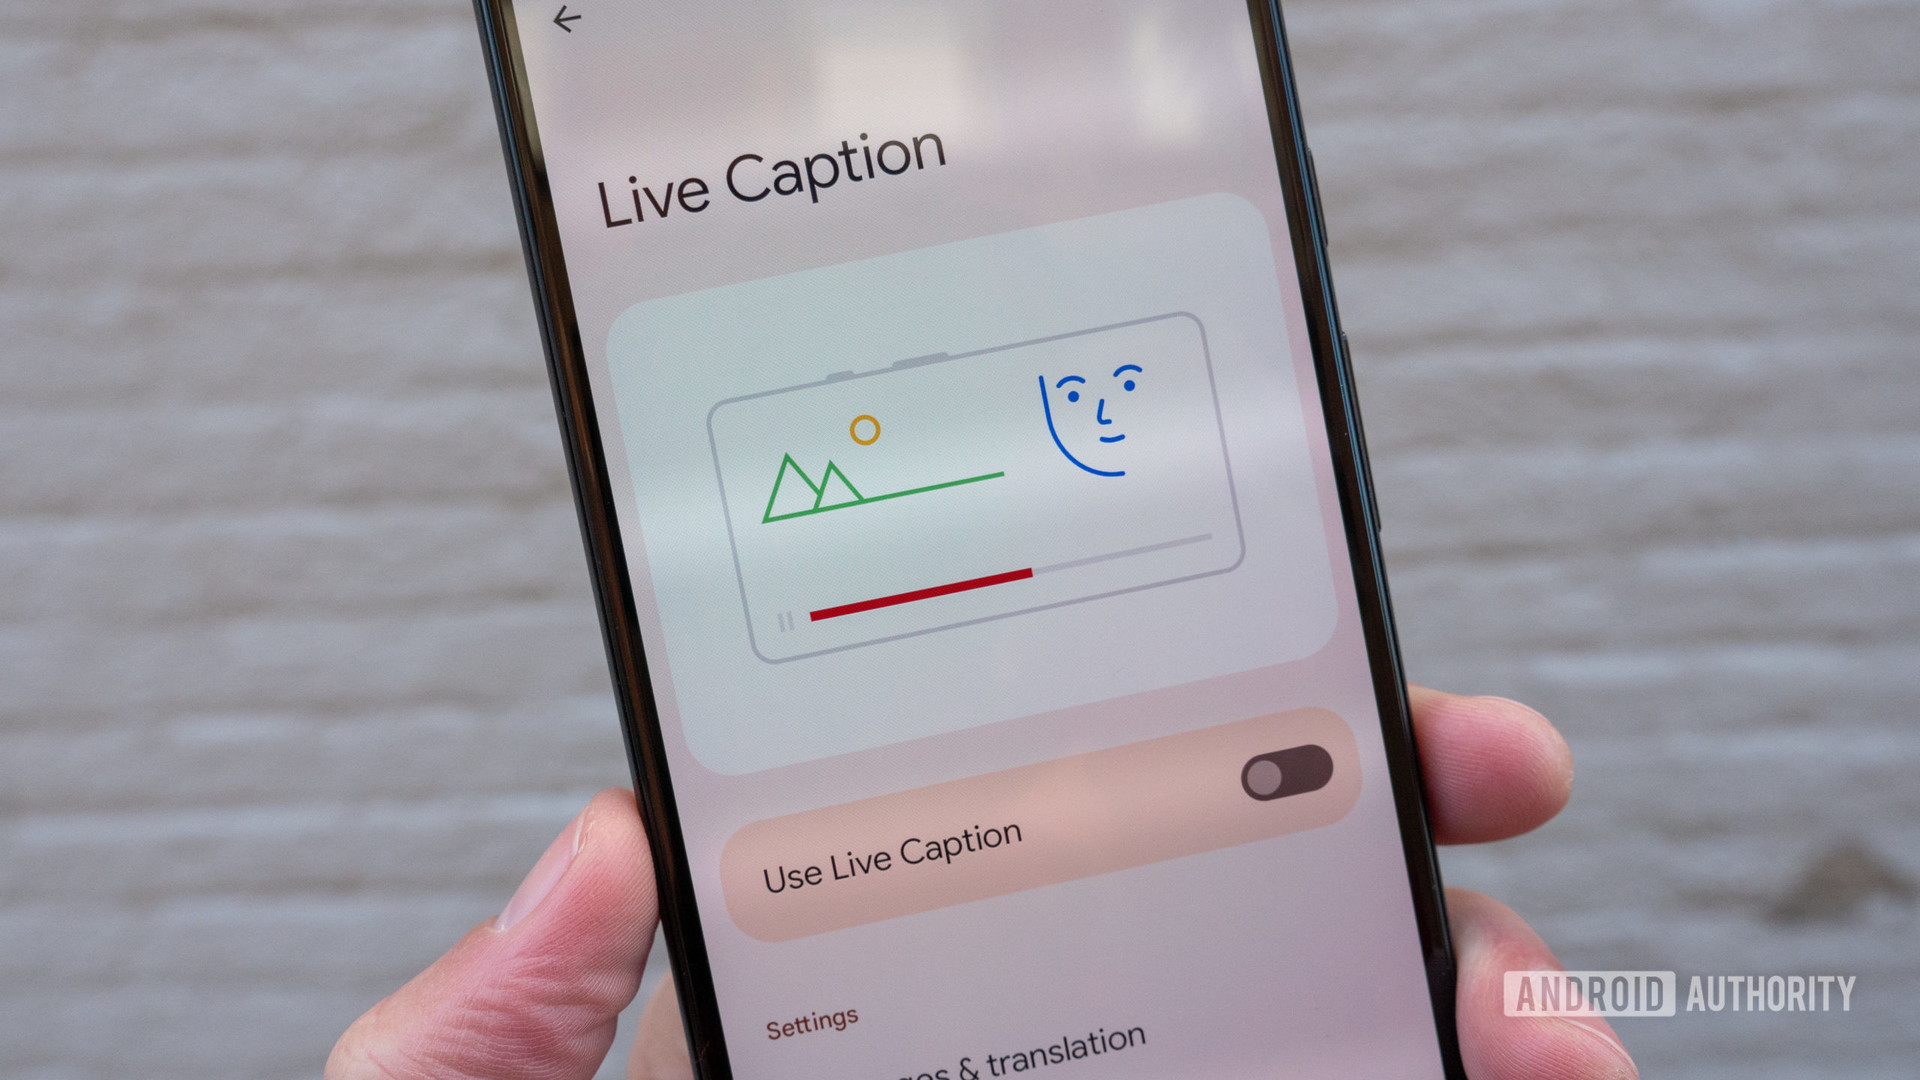 The Google Pixel 6 in hand showing the Live Caption settings page